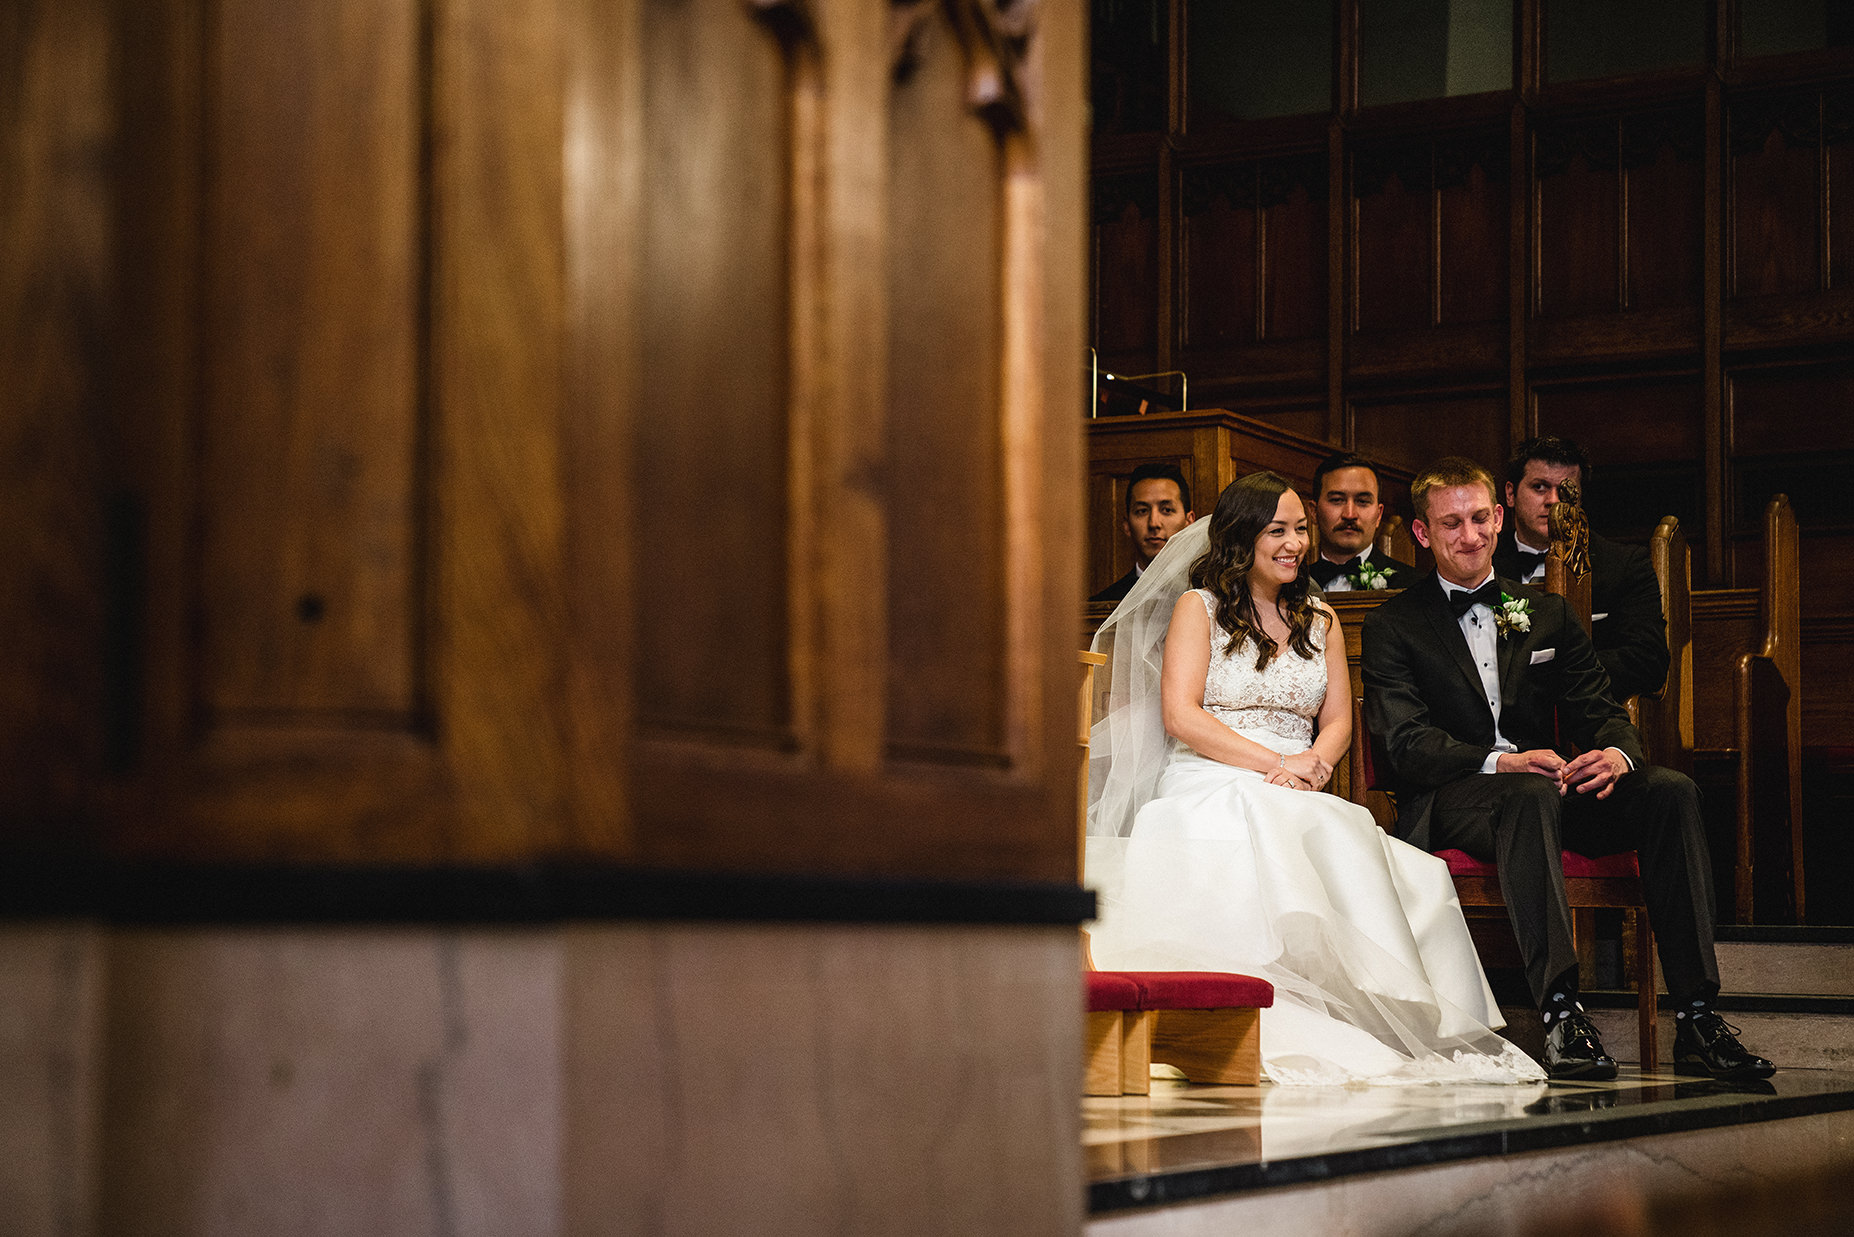 A documentary photograph of the bride and groom laughing during their wedding ceremony at Marsh Chapel in Boston